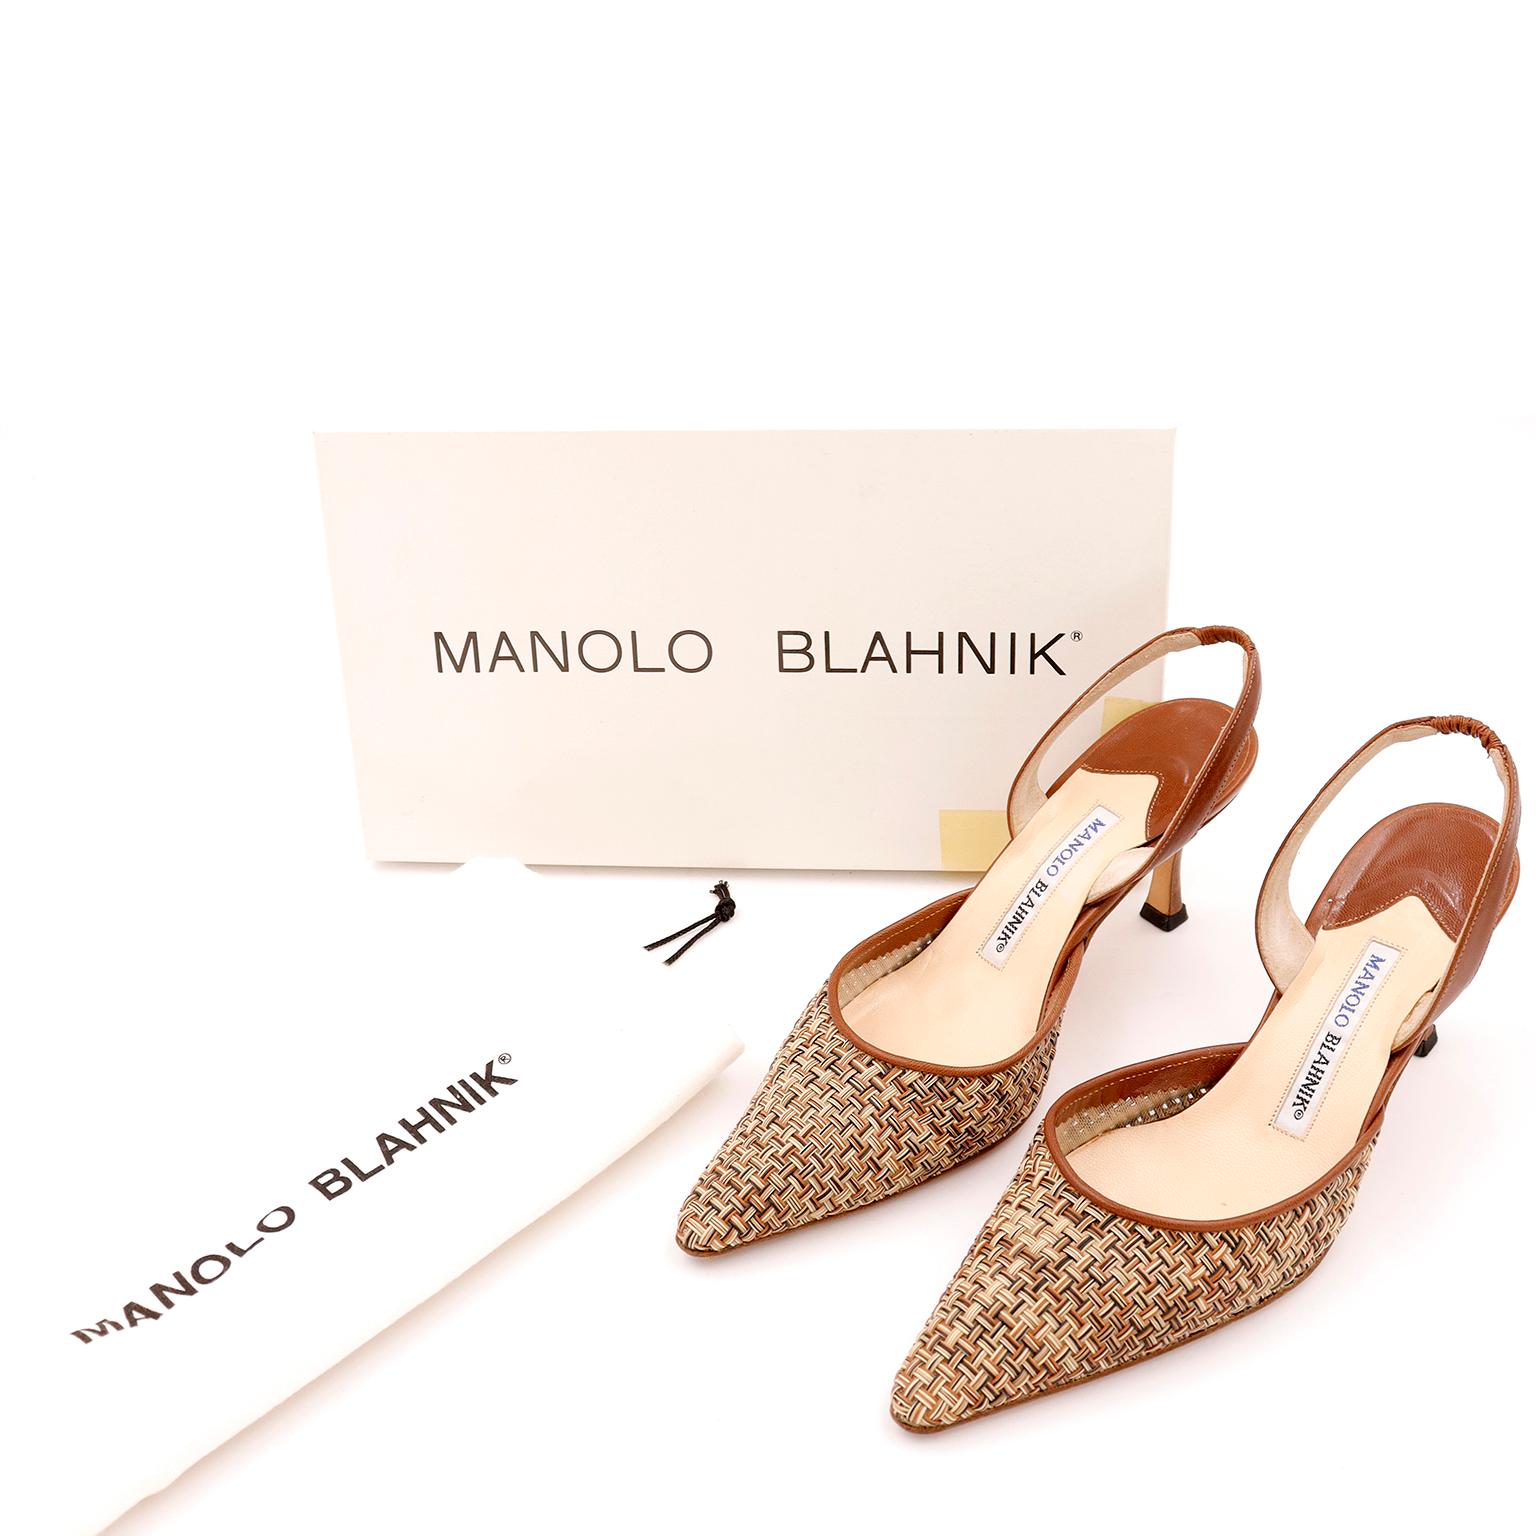 These are fabulous Manolo Blahnik leather woven Carolyne slingback shoes in multiple shades of brown. The classic Carolyne style is a fashion staple for stylish wardrobes. We love the mixed weave and the fun wood heel on these shoes! These are good